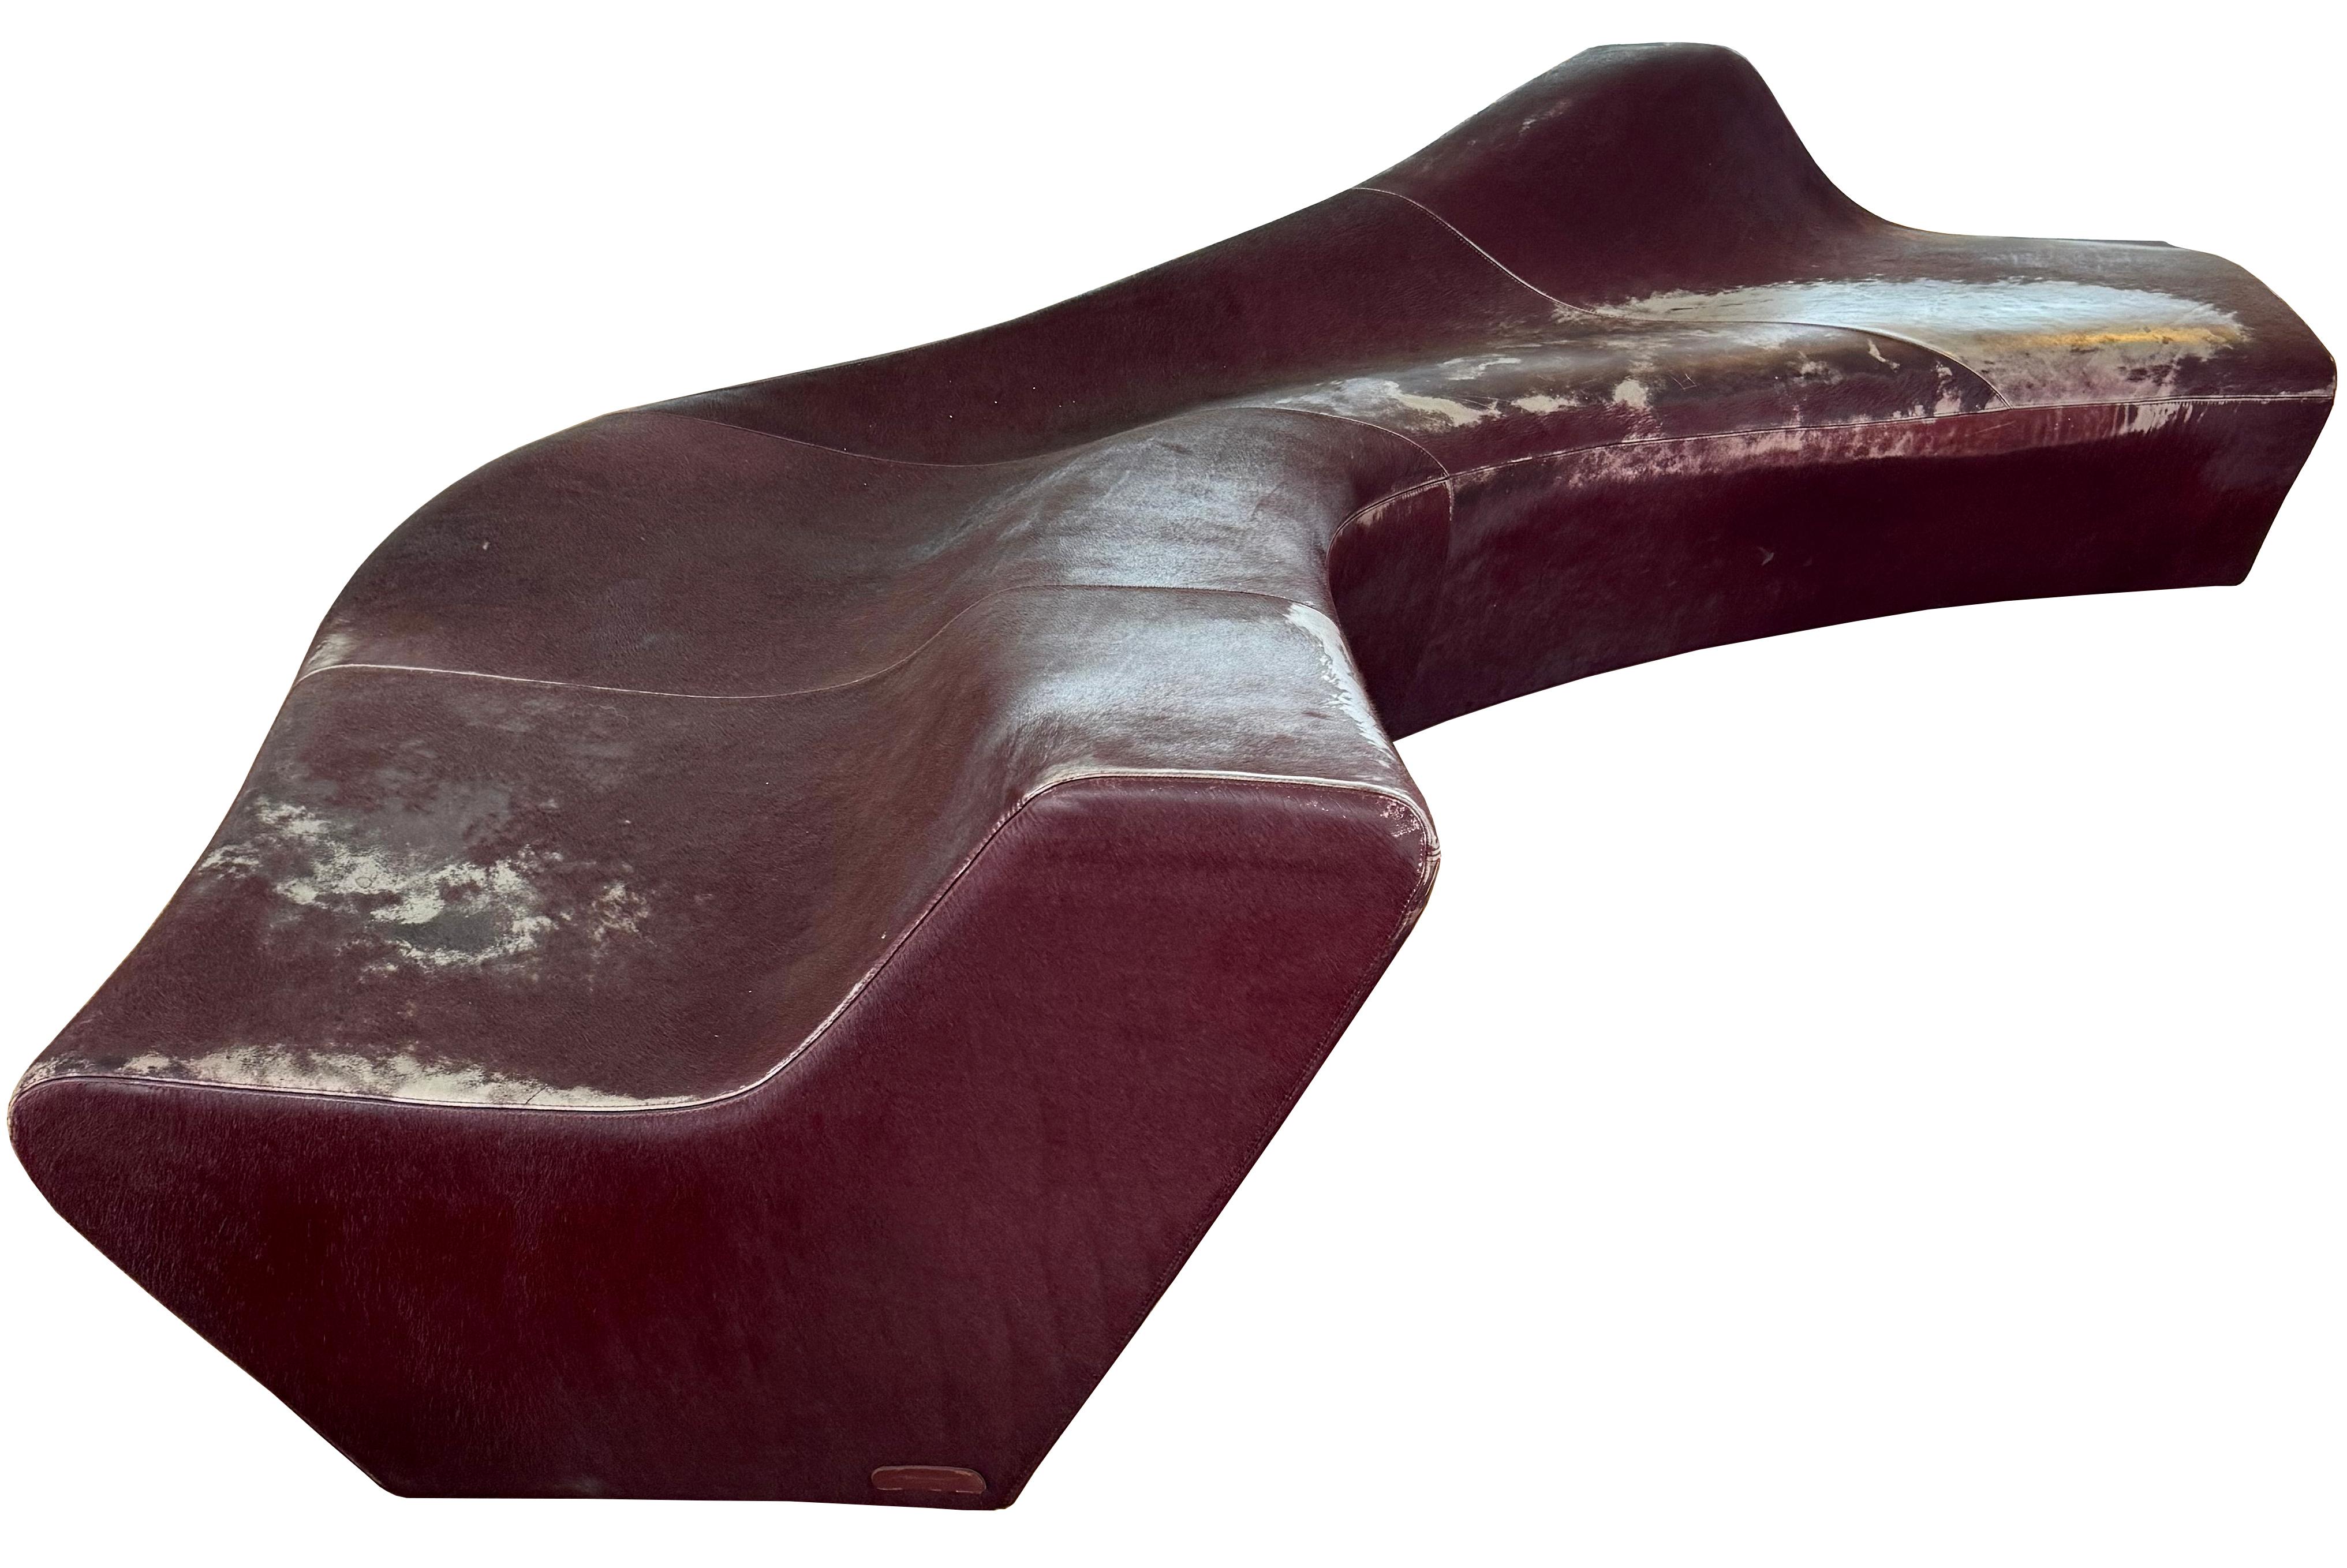 Out of this world piece by iconic British-Iraqi architect Zaha Hadid. 
The Moraine sofa was designed in 2000, and produced by Sawaya & Moroni of Italy. Organic curves wrapped in merlot pony ‘fantasy leather’, a specialty hide produced by Sawaya &